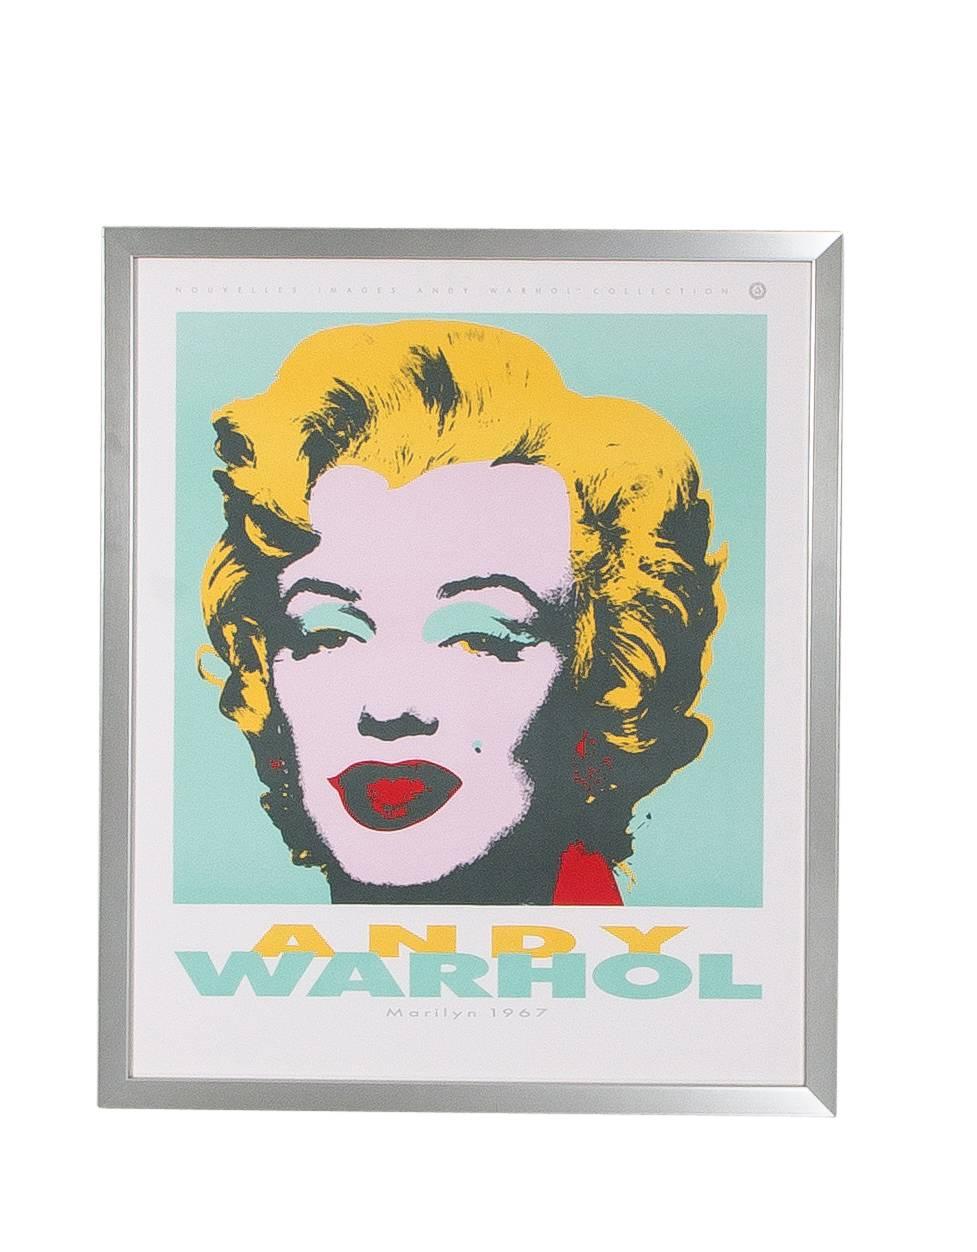 A series of three offset lithograph prints of Andy Warhol Marilyn, 1967. Part of a series of twelve prints designed by Roger L. Schlaifer and published by Nouvelles Images, France 1989. Newly framed in silver wood frames with new glass. Back wire